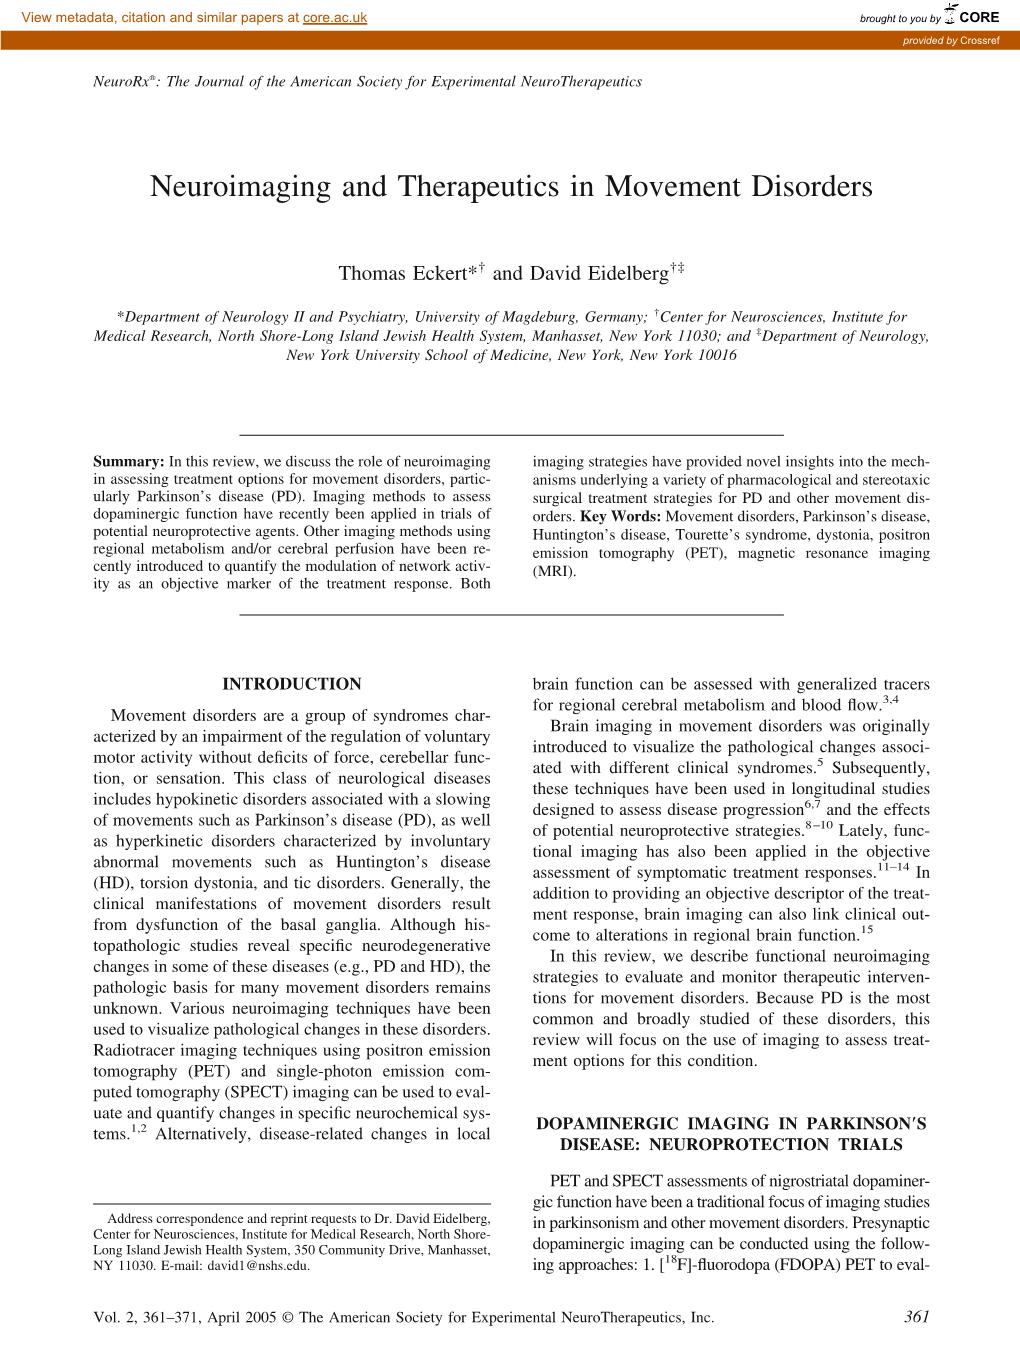 Neuroimaging and Therapeutics in Movement Disorders